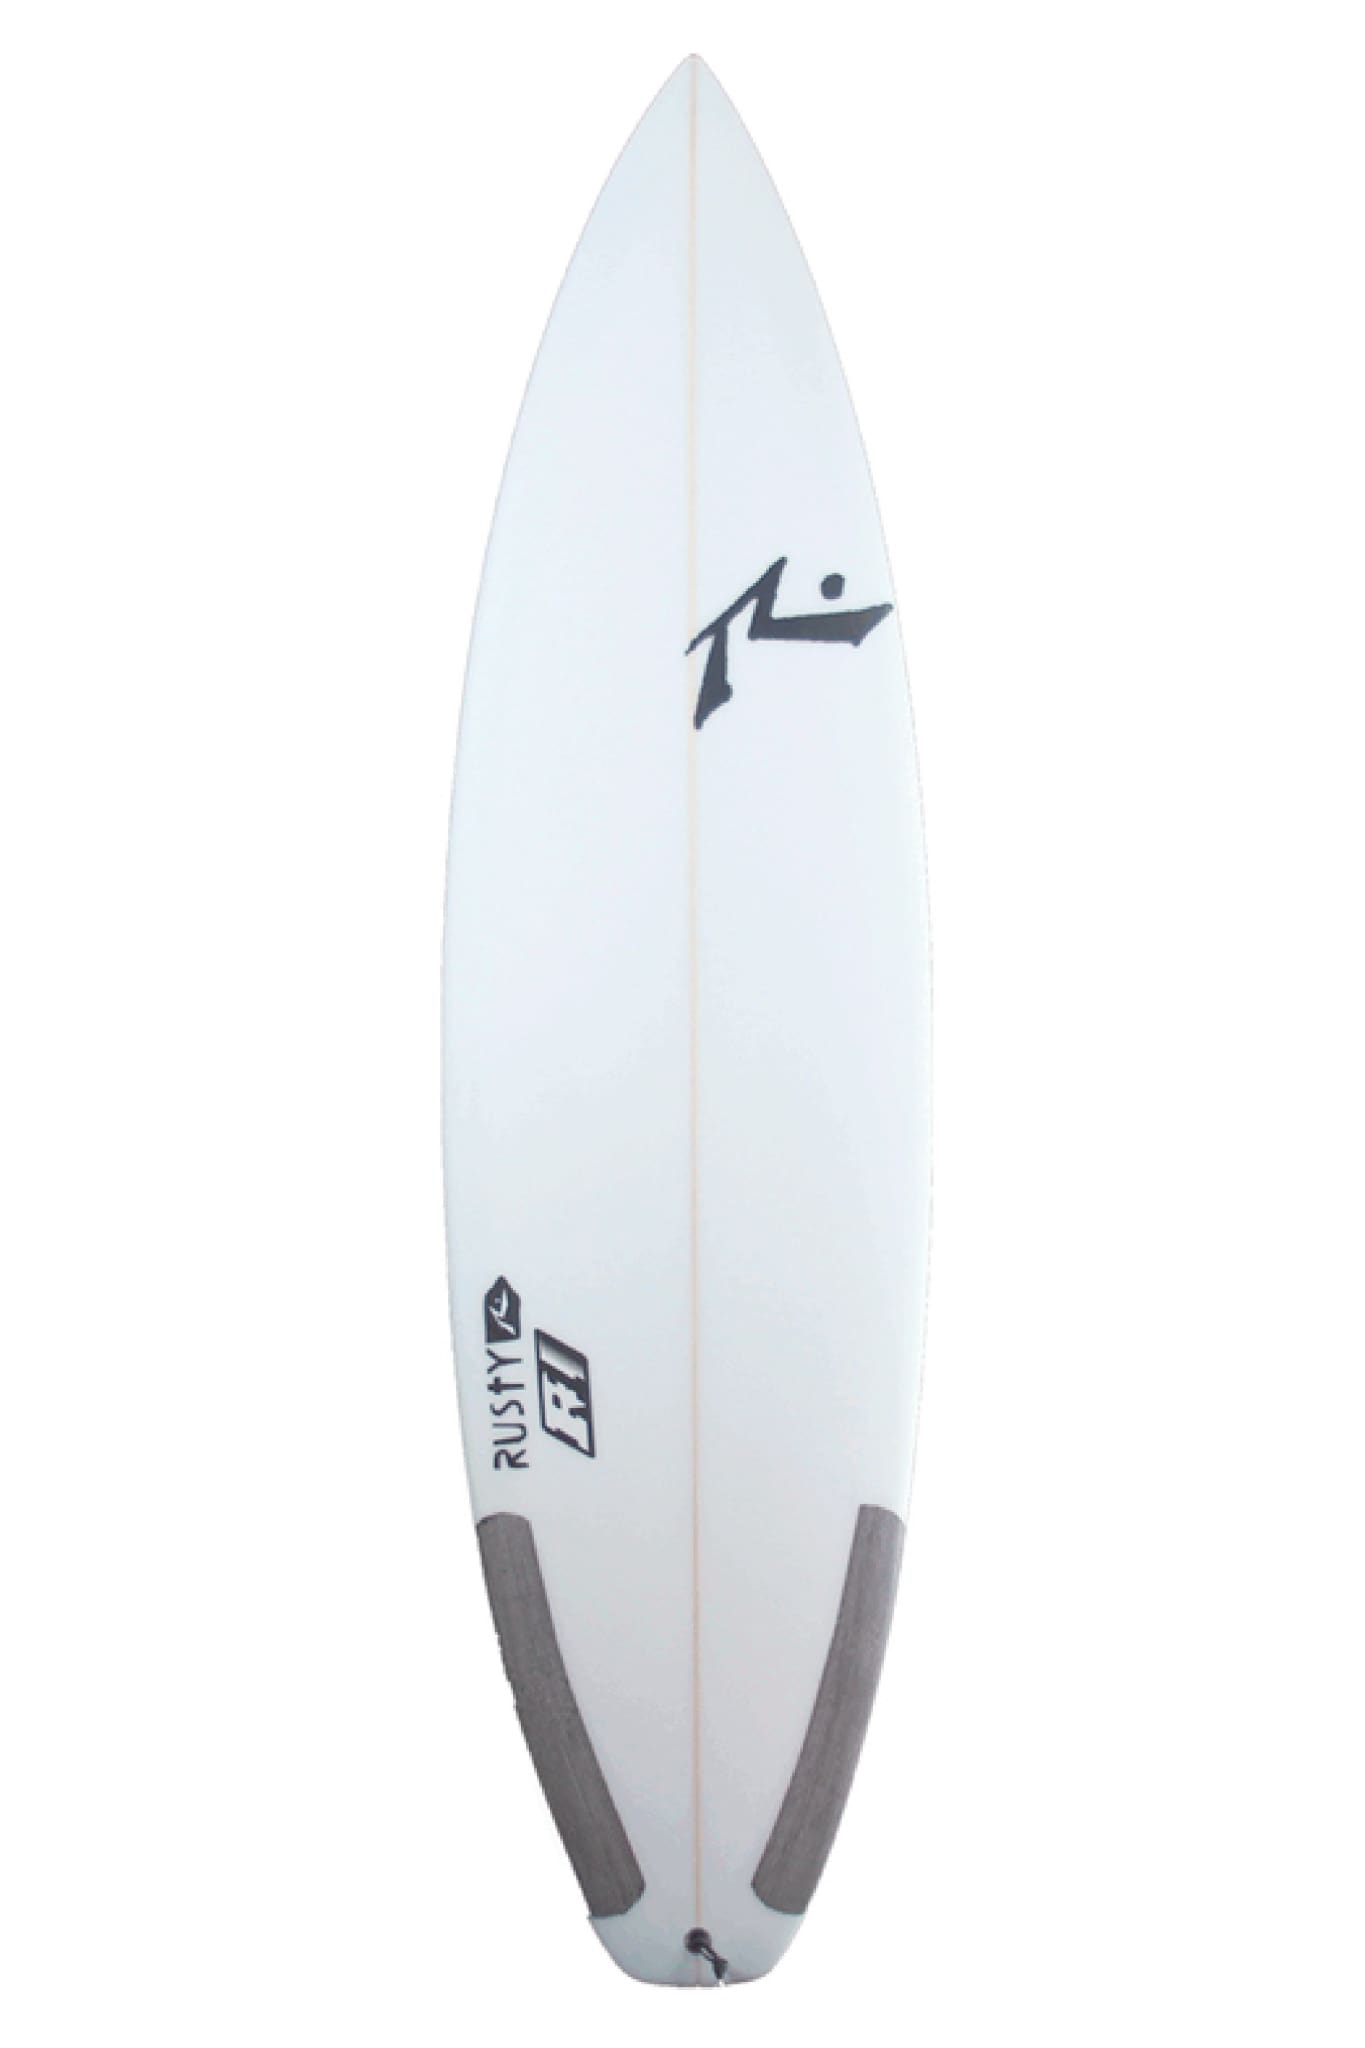 R1 | Surfboards-Rusty Surfboards South Africa